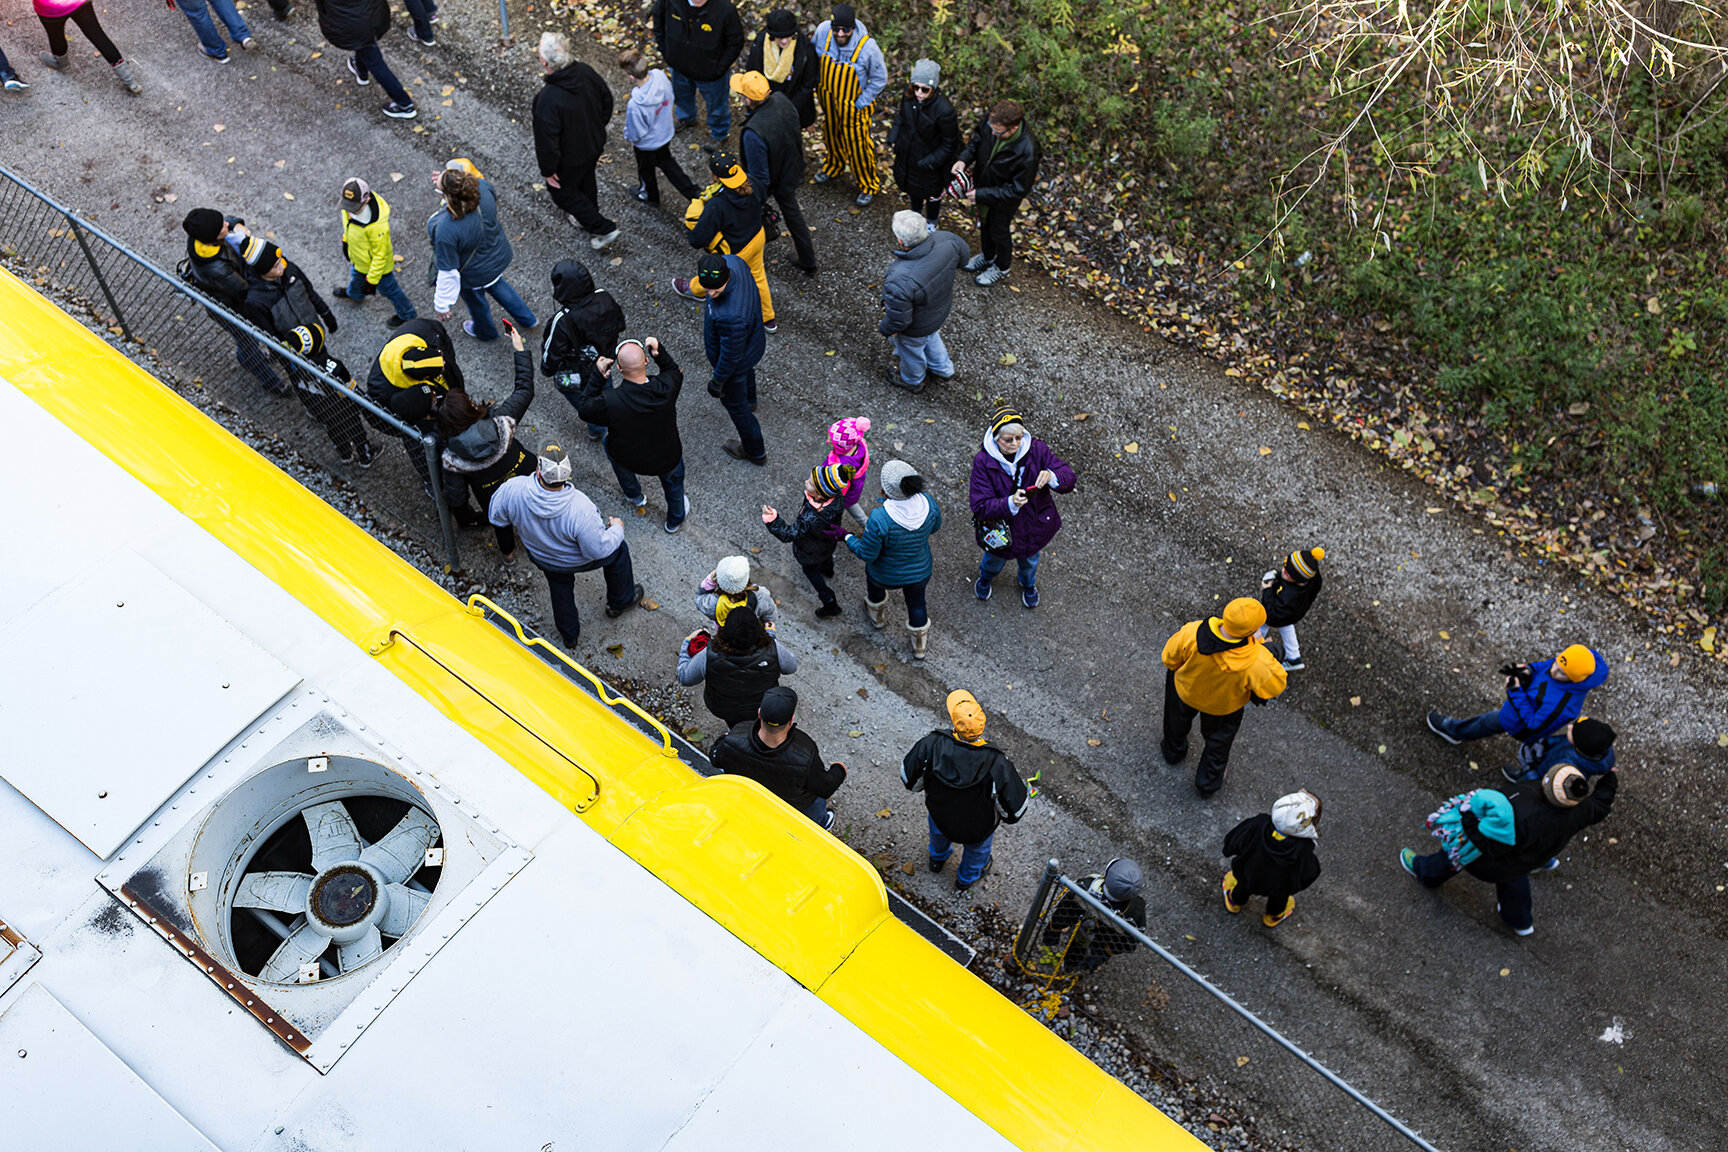  Fans disembark from the Hawkeye Express after its arrival at Kinnick Stadium on Saturday, Oct. 20, 2018.  